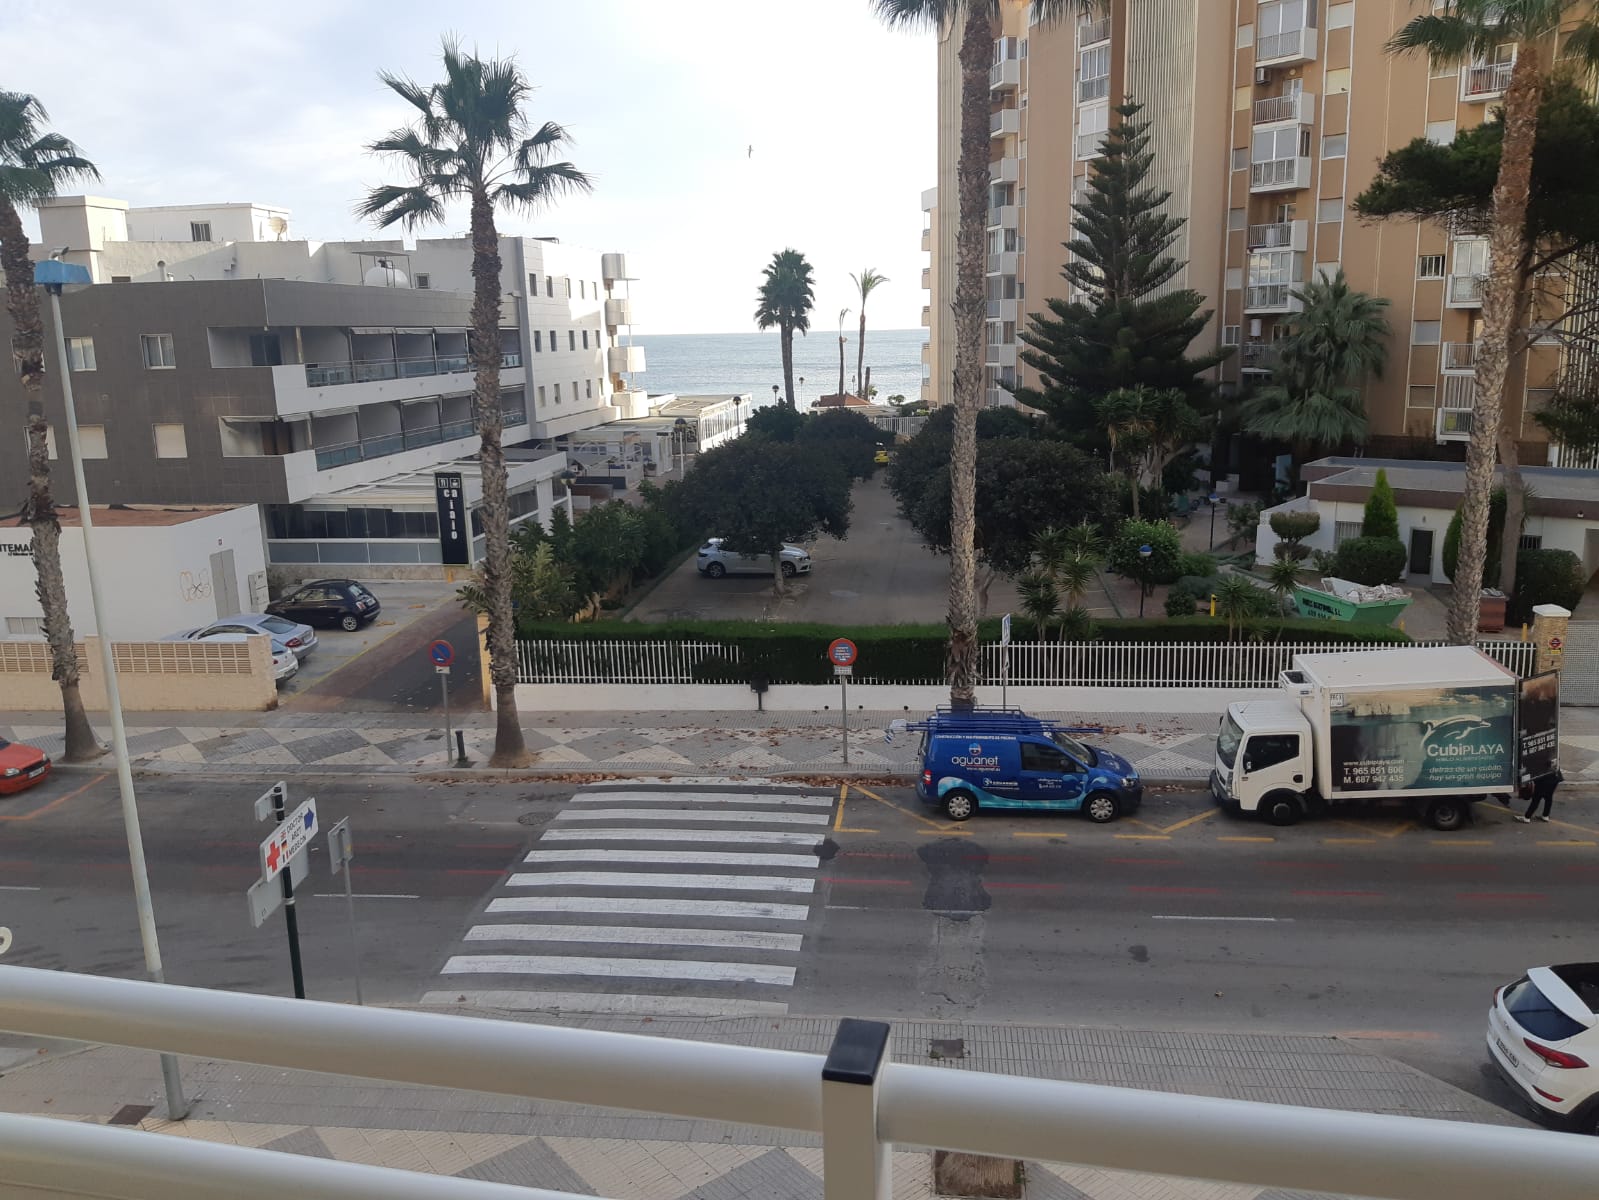 TWO-BEDROOM APARTMENT WITH SEA VIEWS IN CALPE